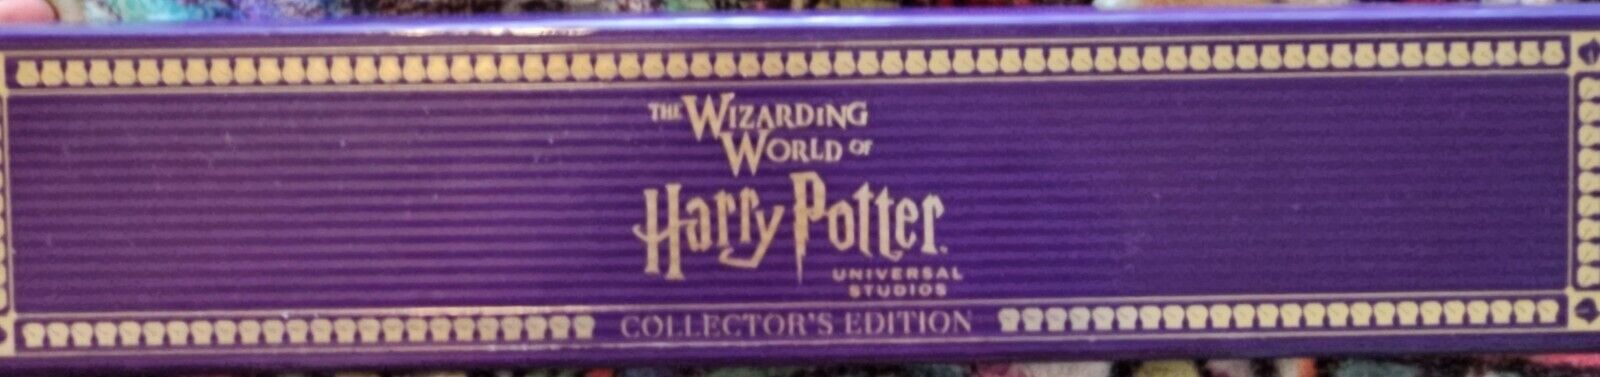 Universal Studios Harry Potter Interactive Wand 2021 Collector’s Edition w/ Box